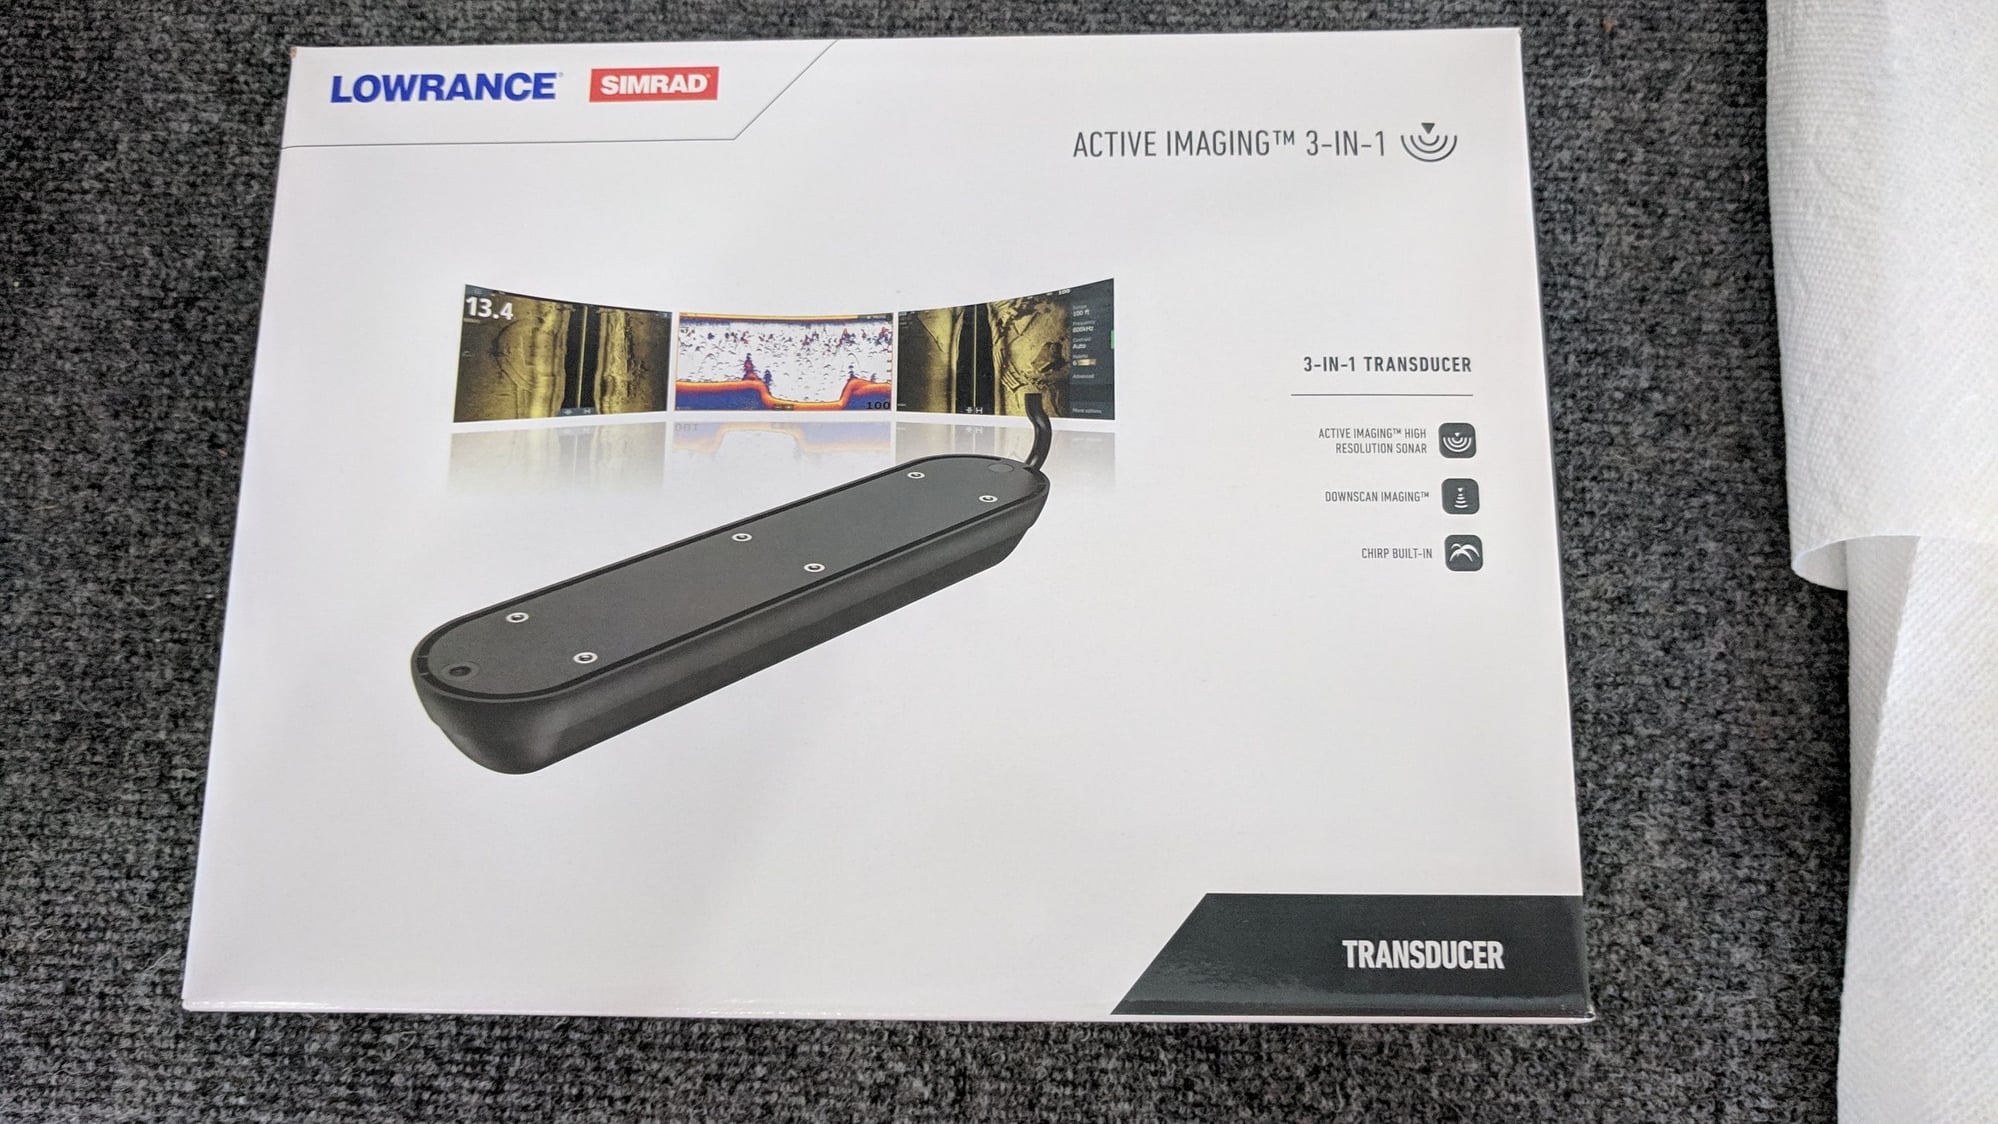 Active Imaging 3-in-1 Simrad Lowrance Transducer Side Down Scan